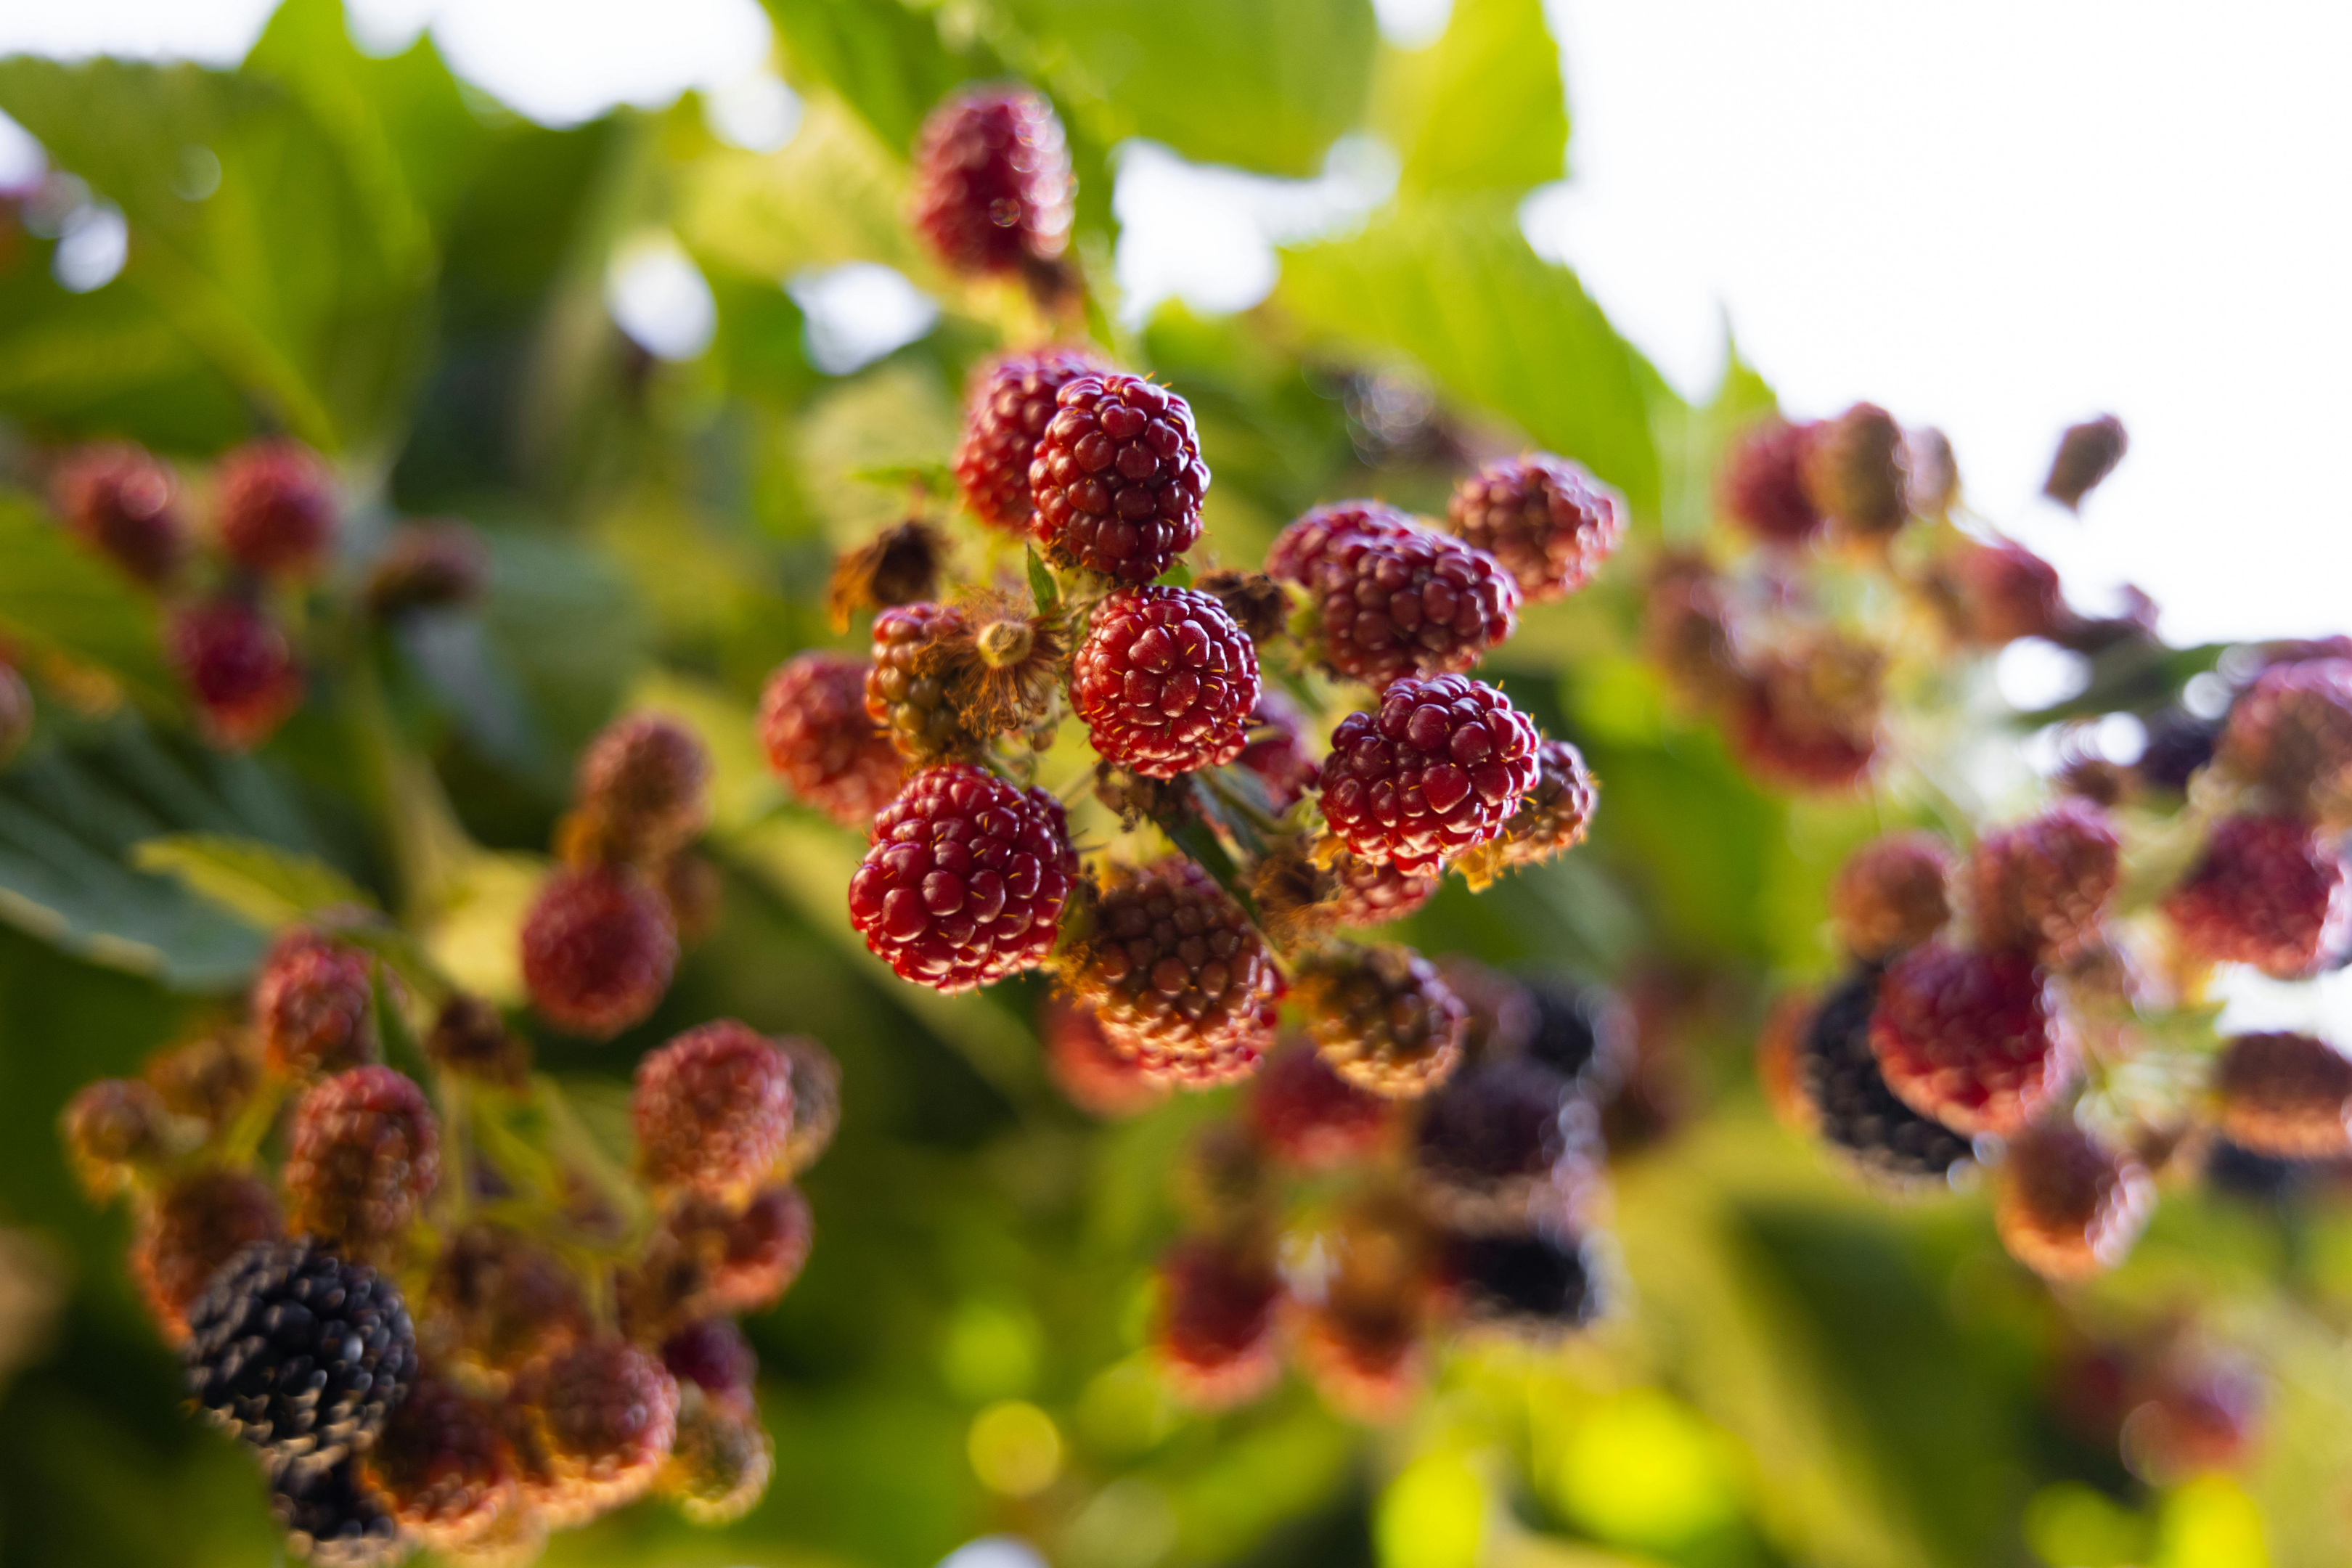 A mulberry tree produces mulberry leaves which offers various health benefits.